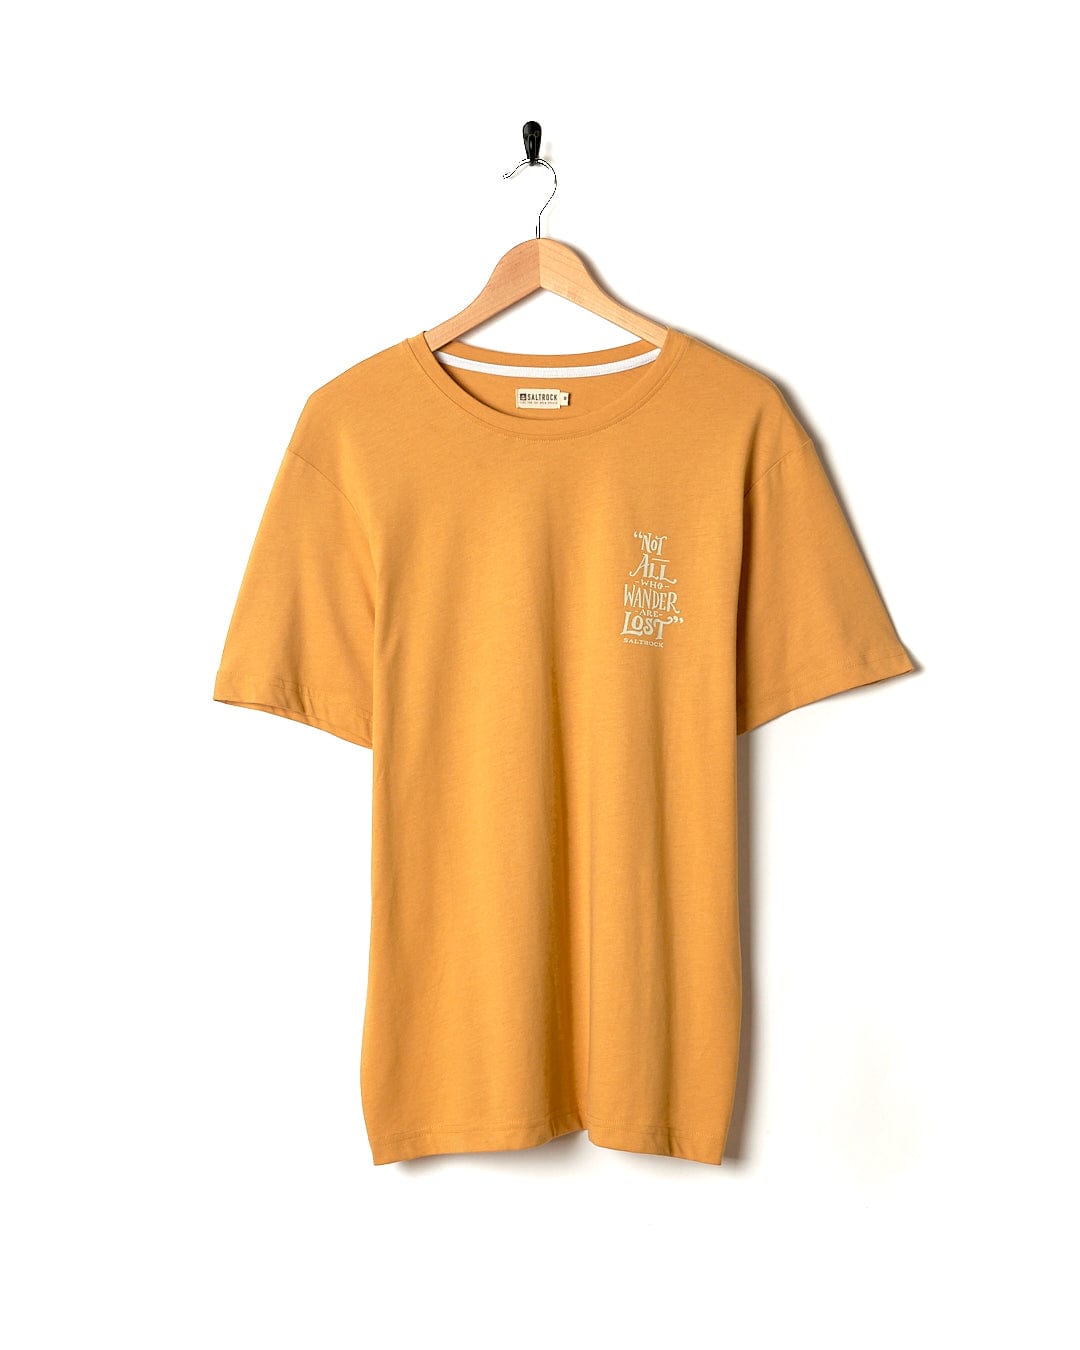 A Lost Ships - Mens Short Sleeve T-Shirt - Yellow hanging on a hanger. Brand Name: Saltrock